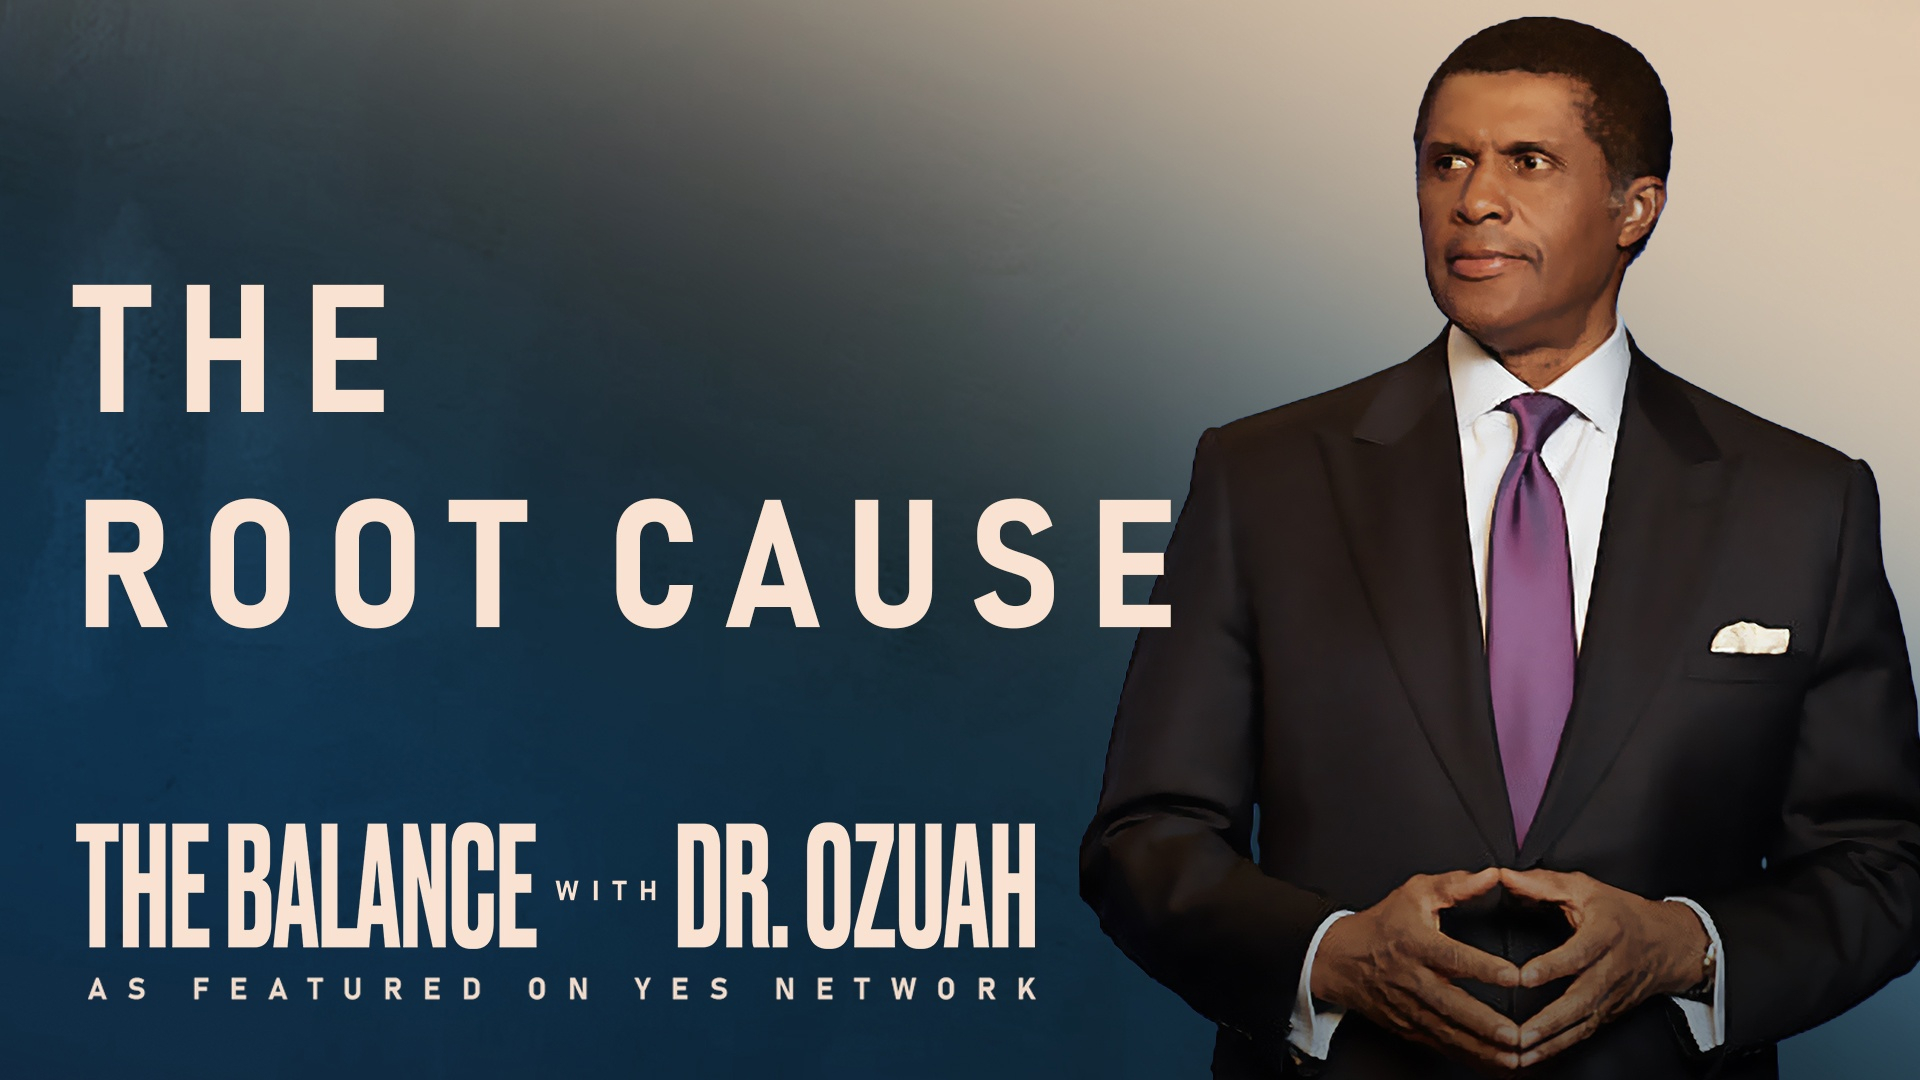 The Balance with Dr. Ozuah - Season Two, Episode 2